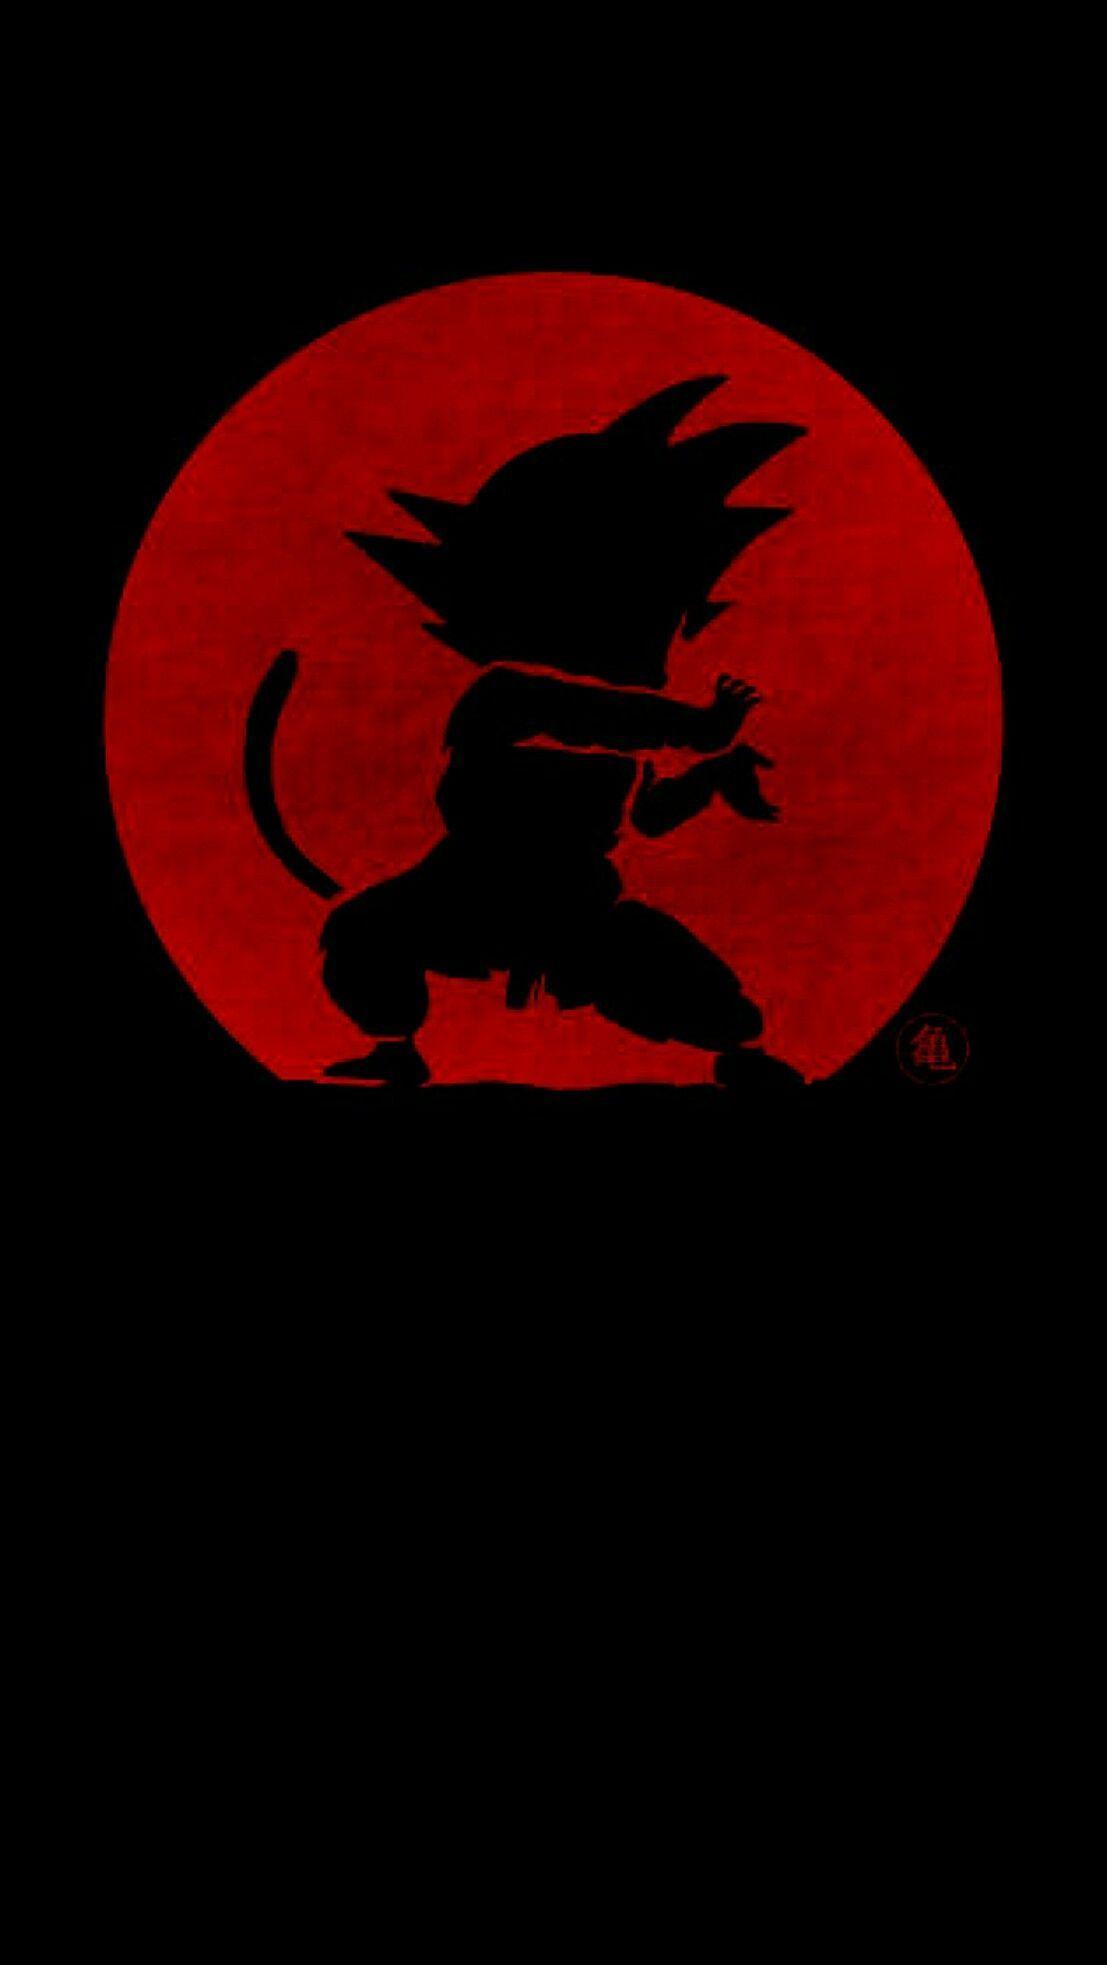 Son Goku. anime. Black wallpaper, Dbz and Android